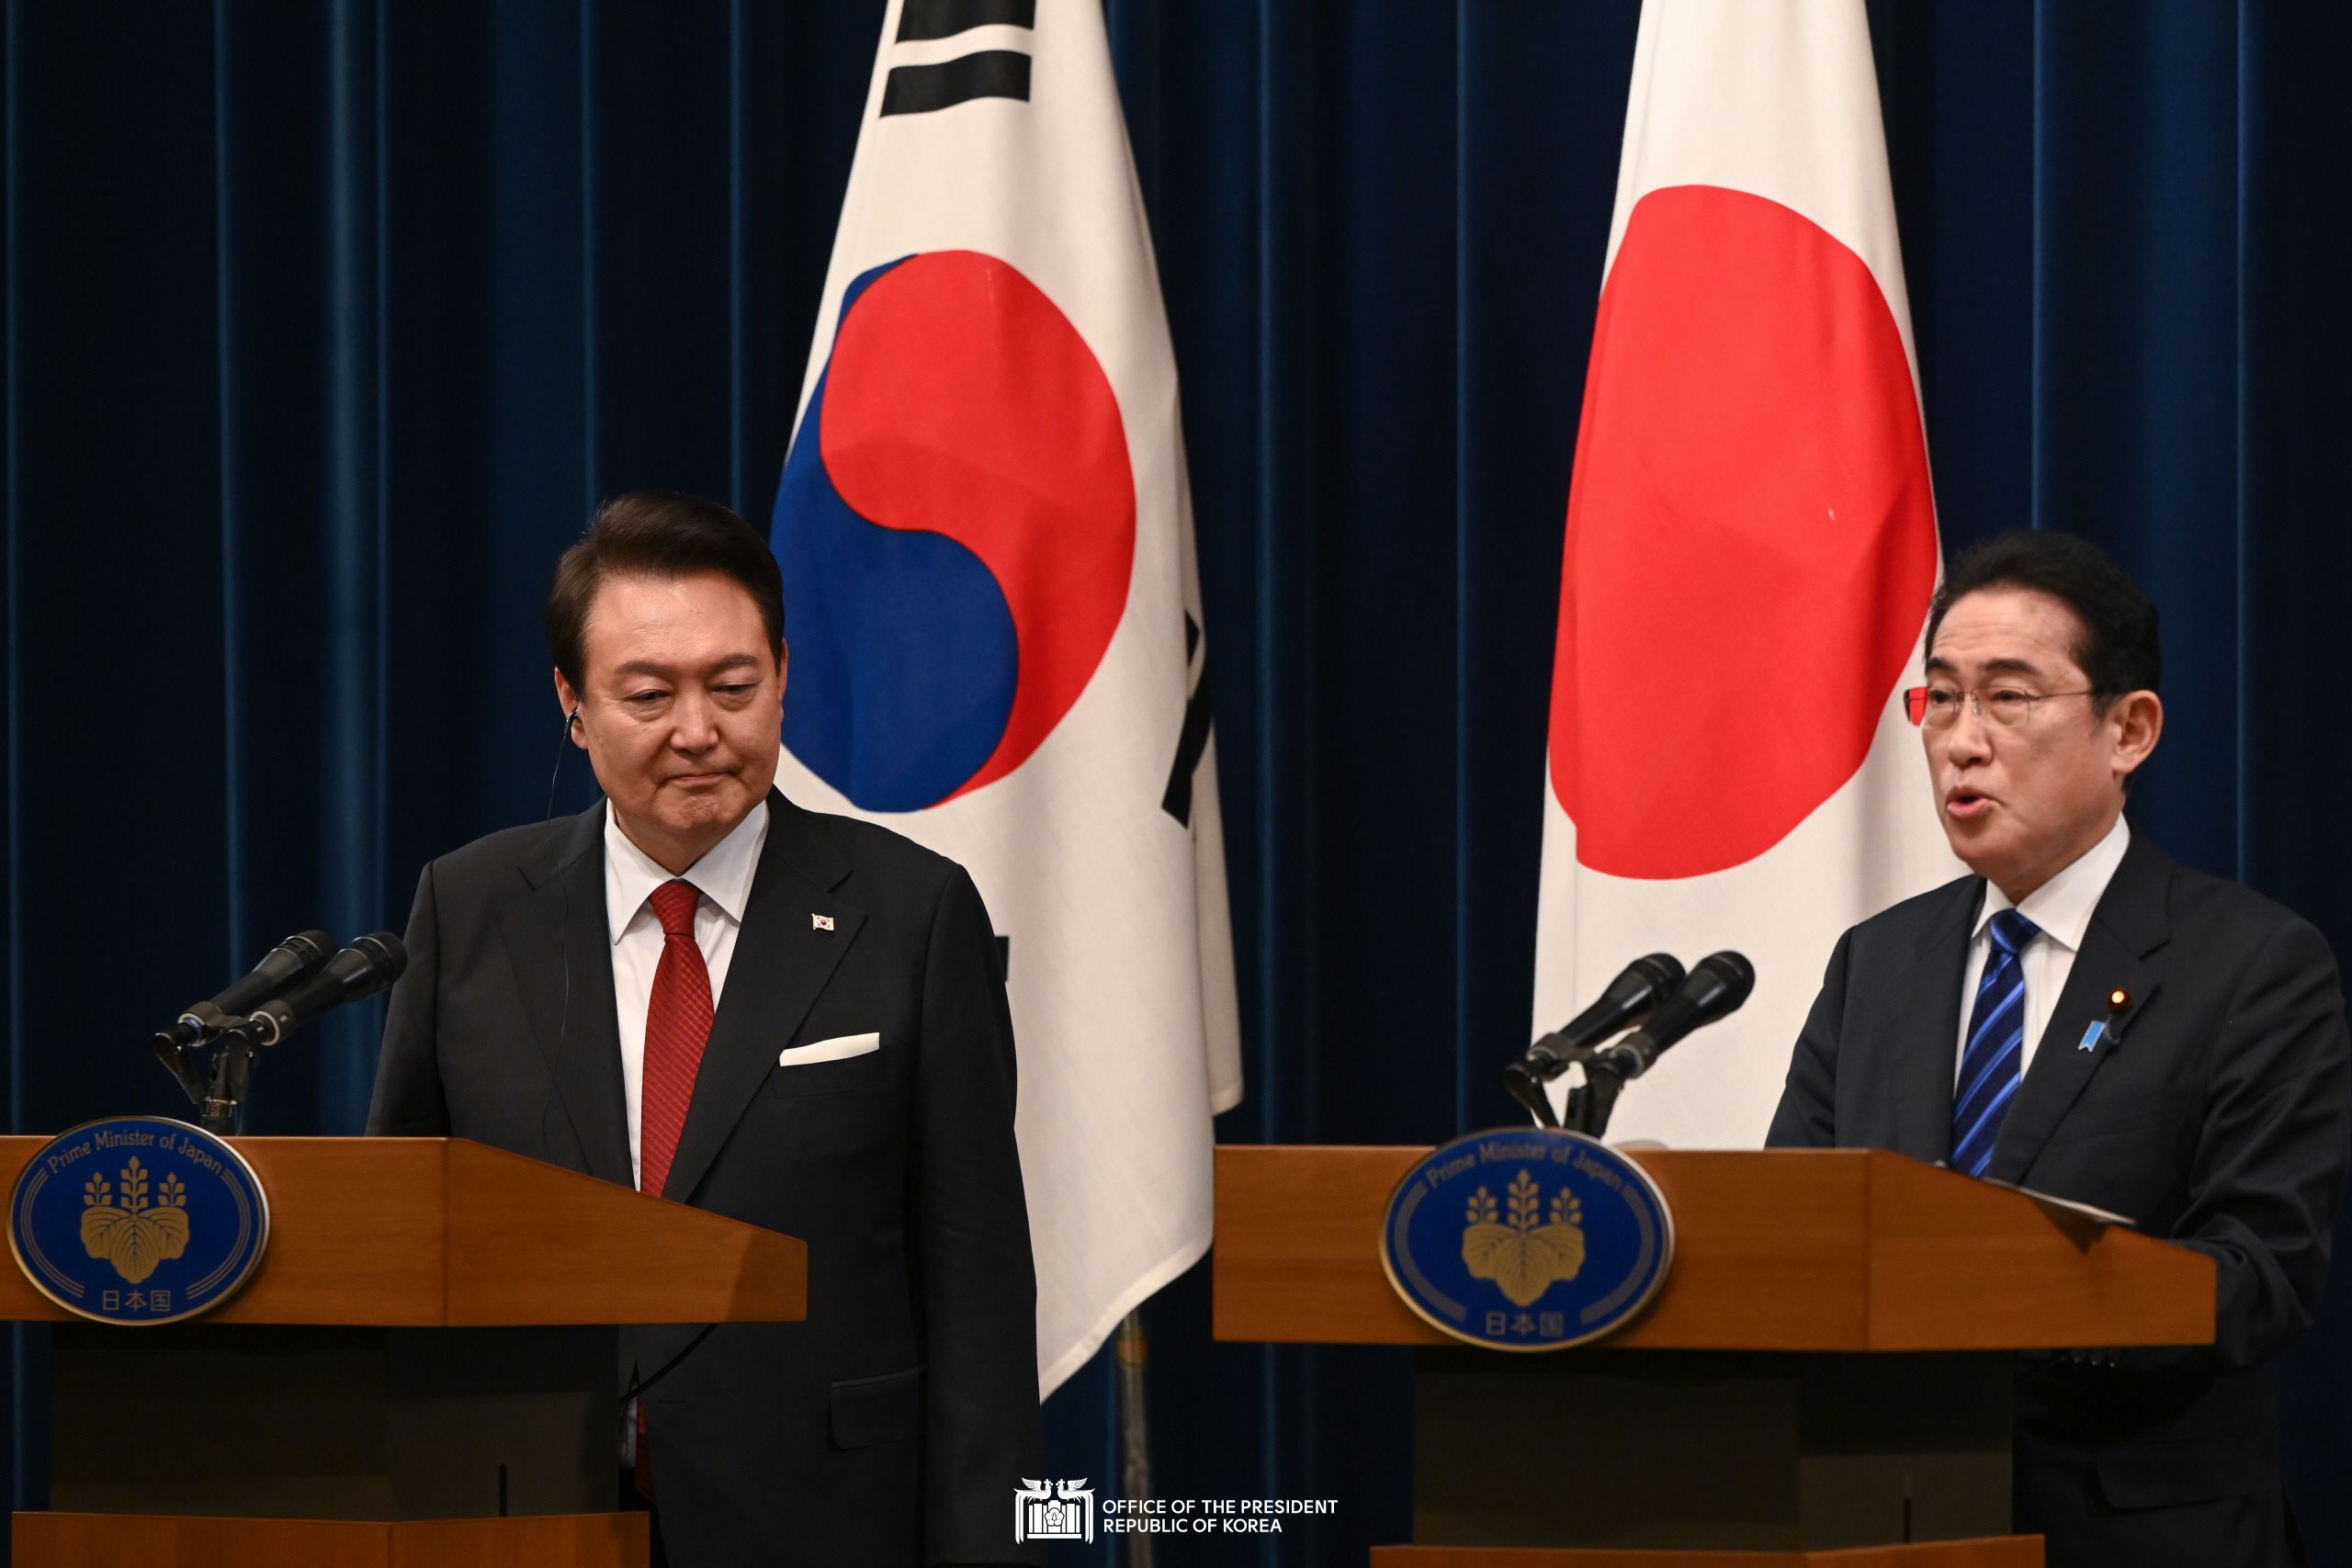 Attending a joint press conference following the Korea-Japan summit slide 1